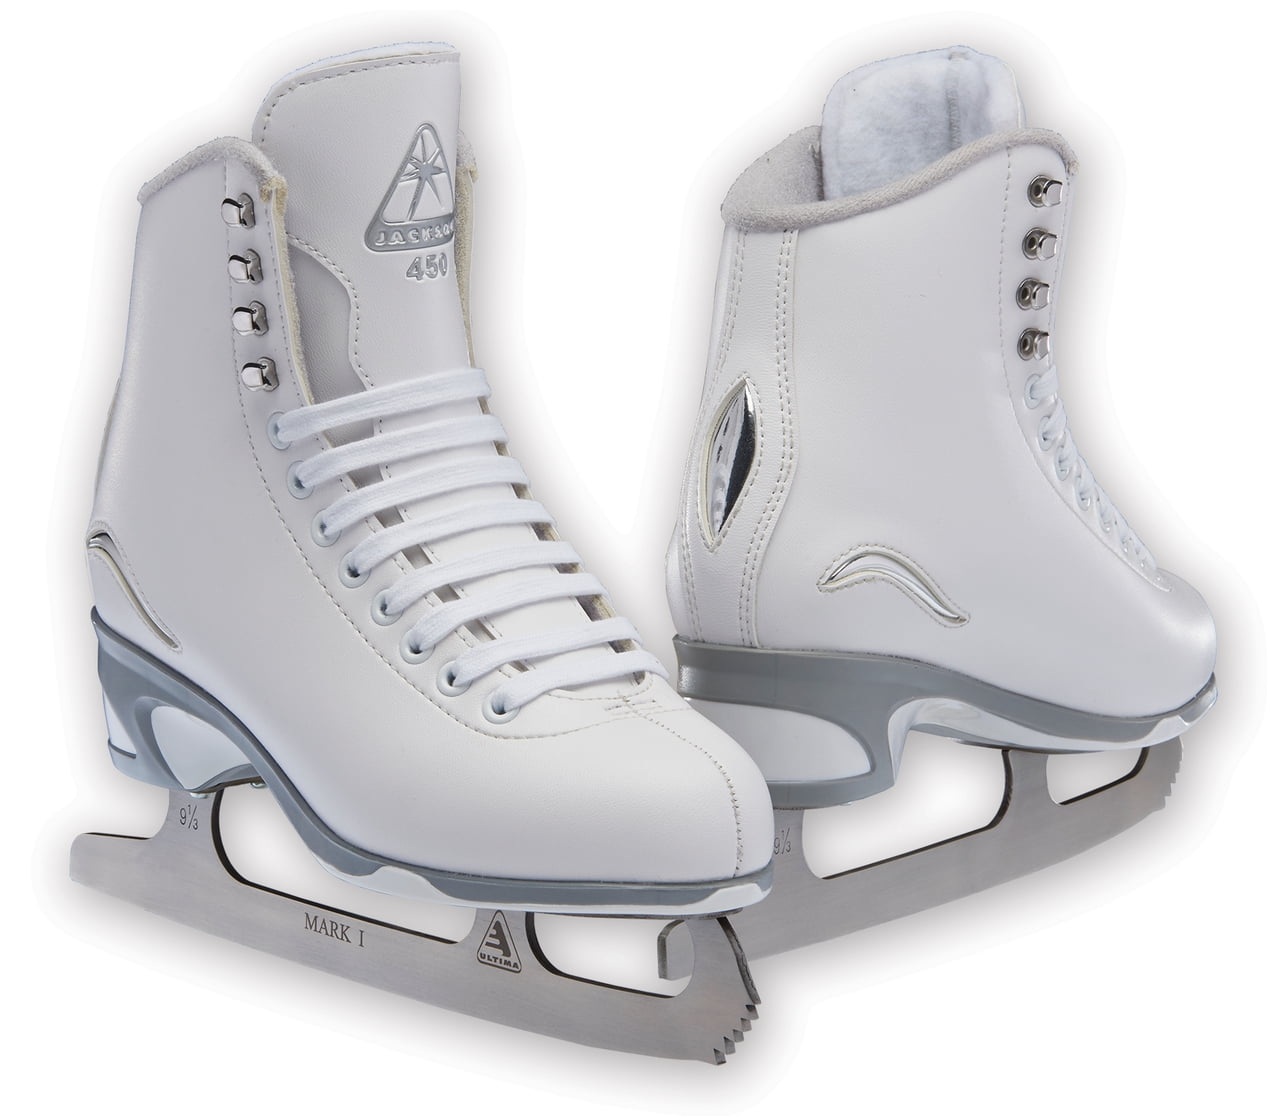 New DR SK33 soft boot women's ice figure skates size 10 sz womens ladies ladie's 